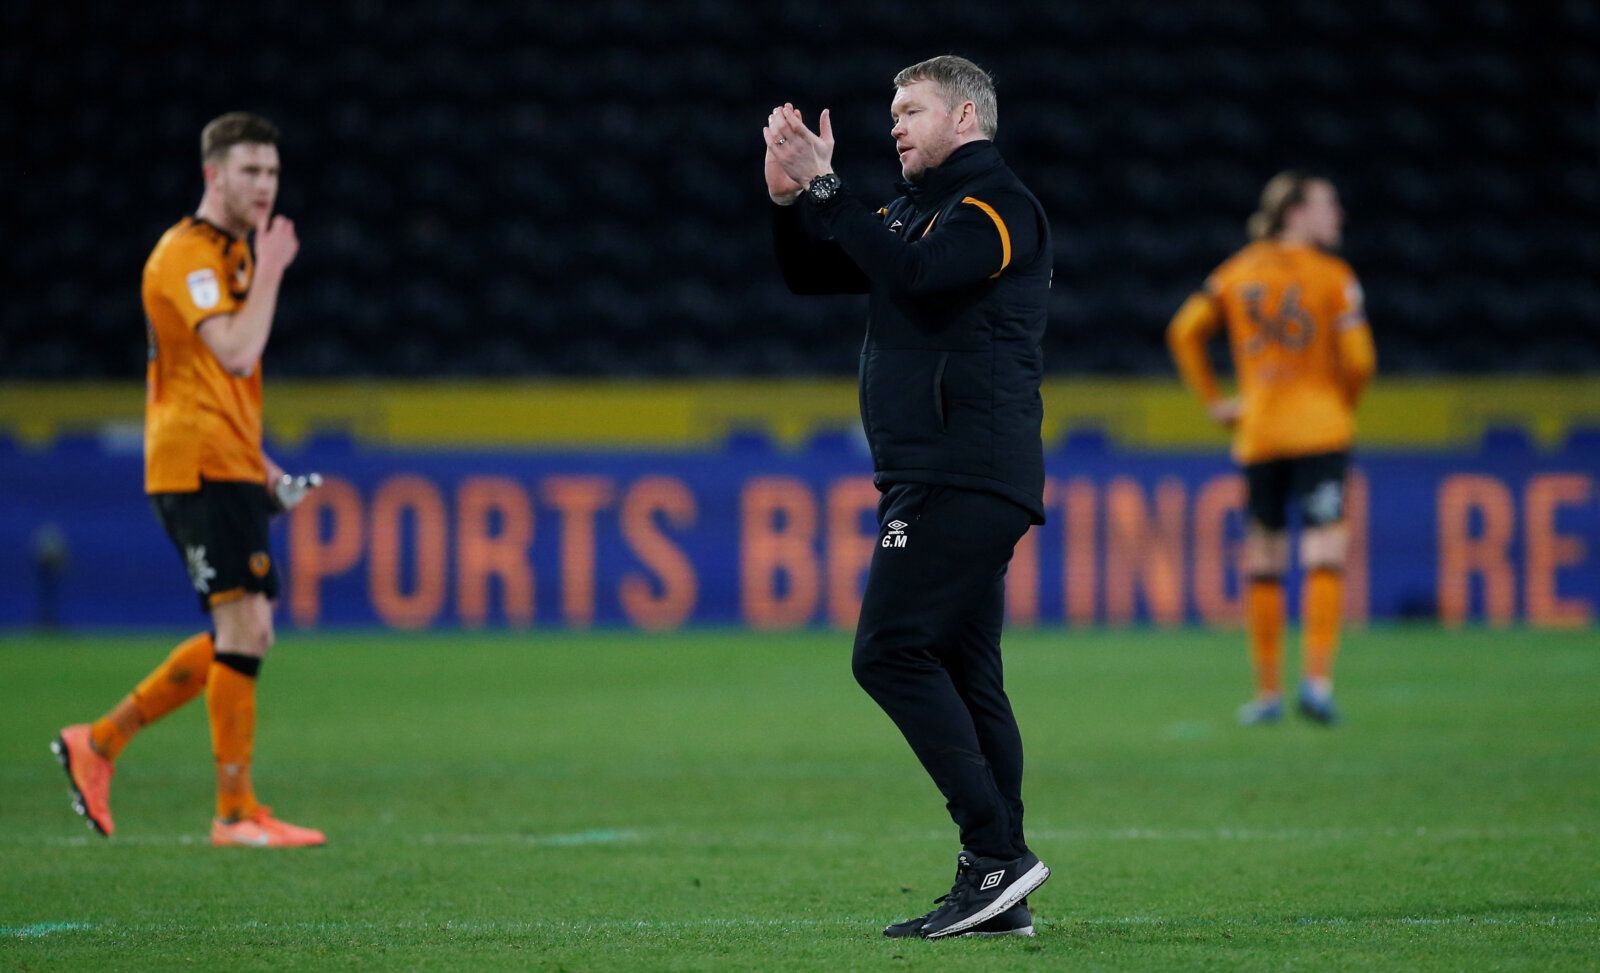 Soccer Football - Championship - Hull City v Swansea City - KCOM Stadium, Hull, Britain - February 14, 2020   Hull City manager Grant McCann applauds fans after the match   Action Images/Craig Brough    EDITORIAL USE ONLY. No use with unauthorized audio, video, data, fixture lists, club/league logos or 